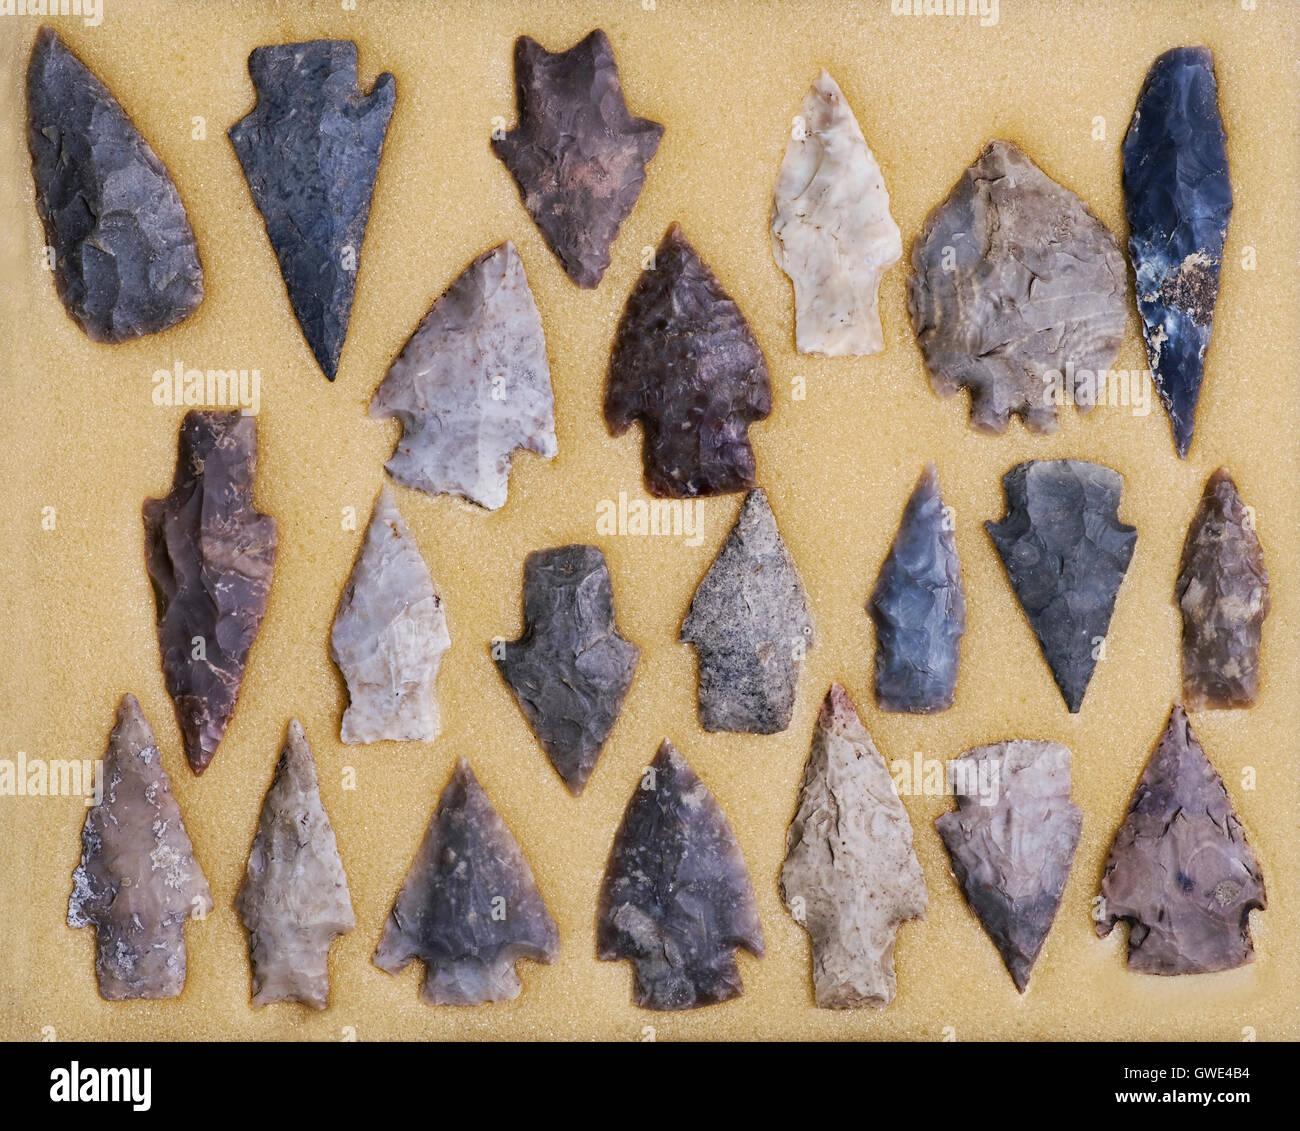 real american indian arrowheads found in dripping springs texas GWE4B4